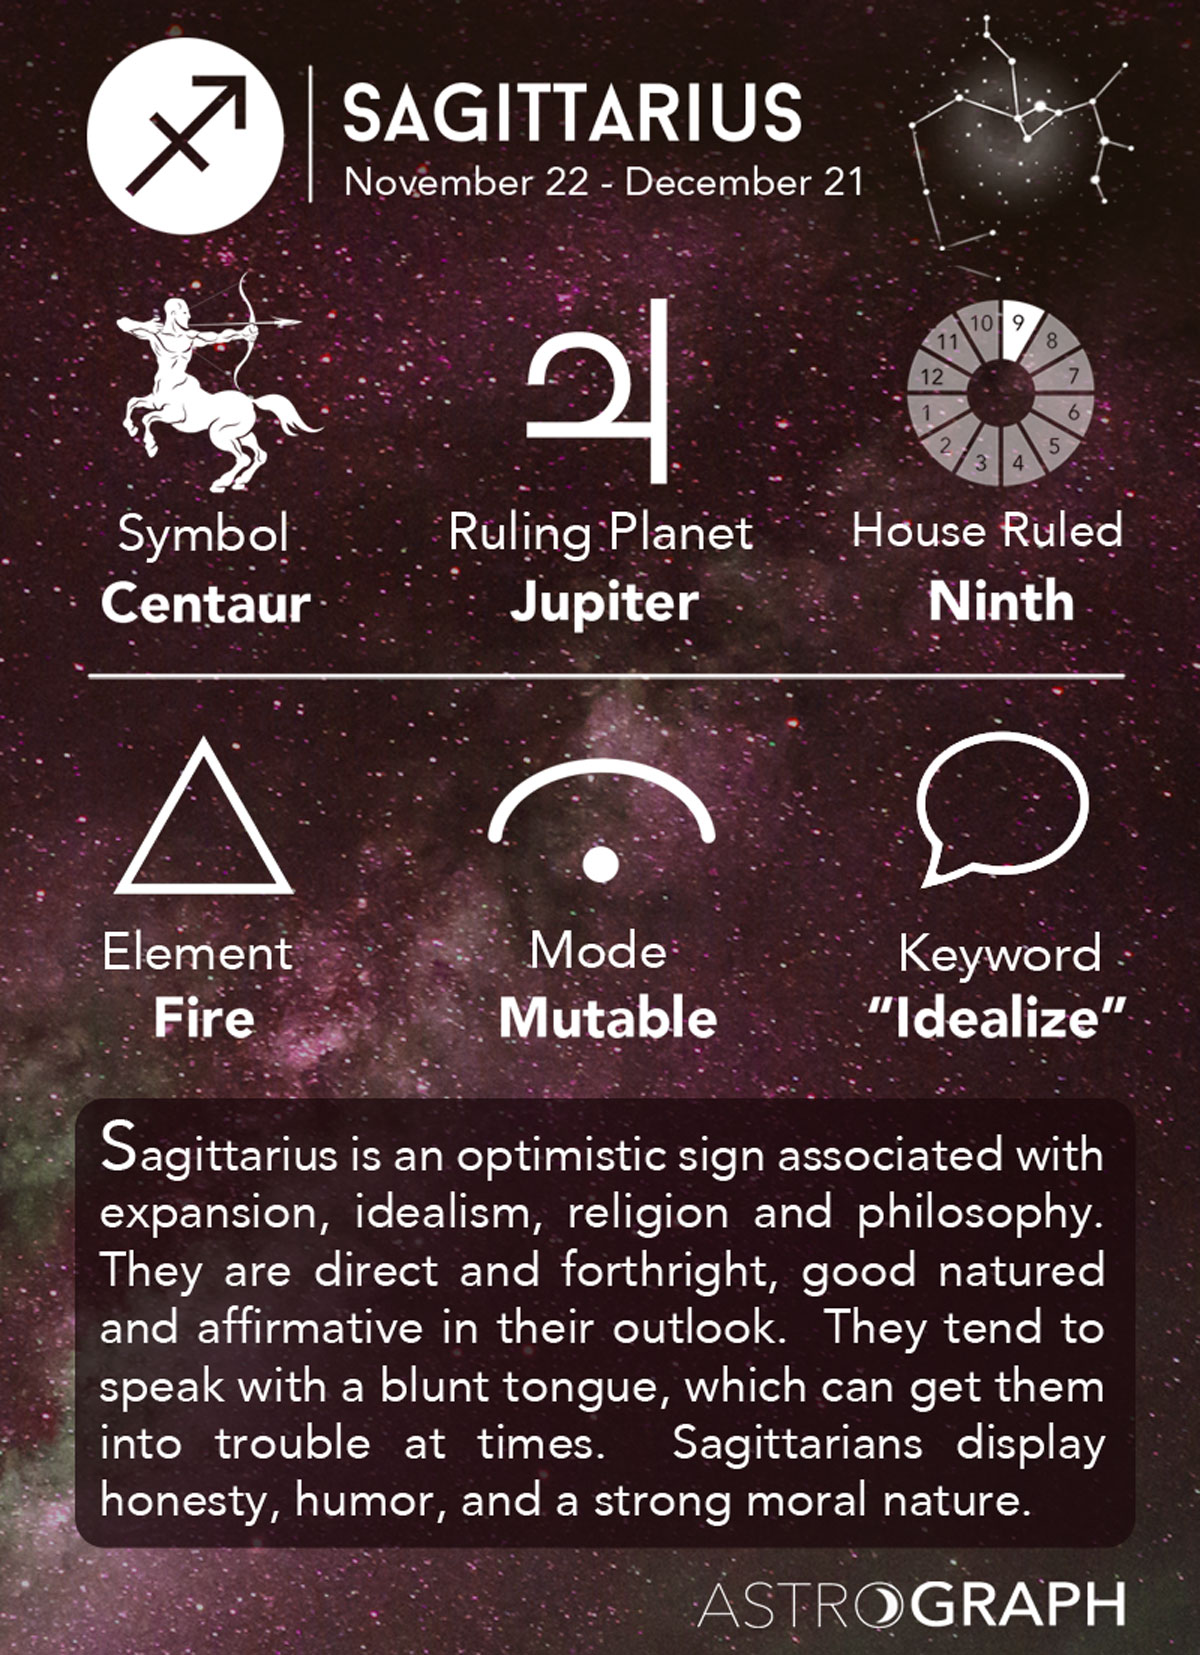 What planet is ruled by Sagittarius?